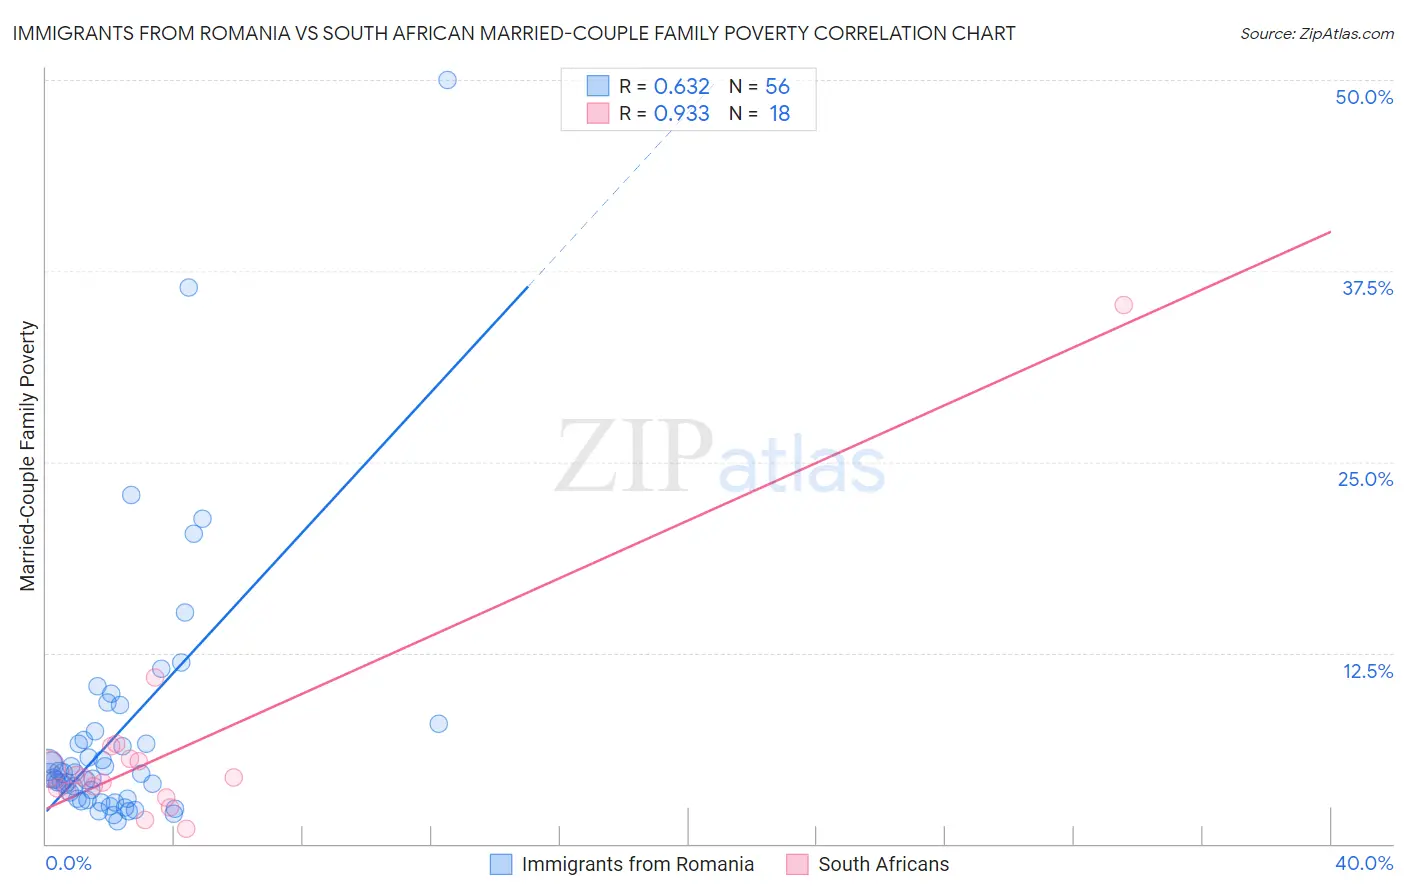 Immigrants from Romania vs South African Married-Couple Family Poverty